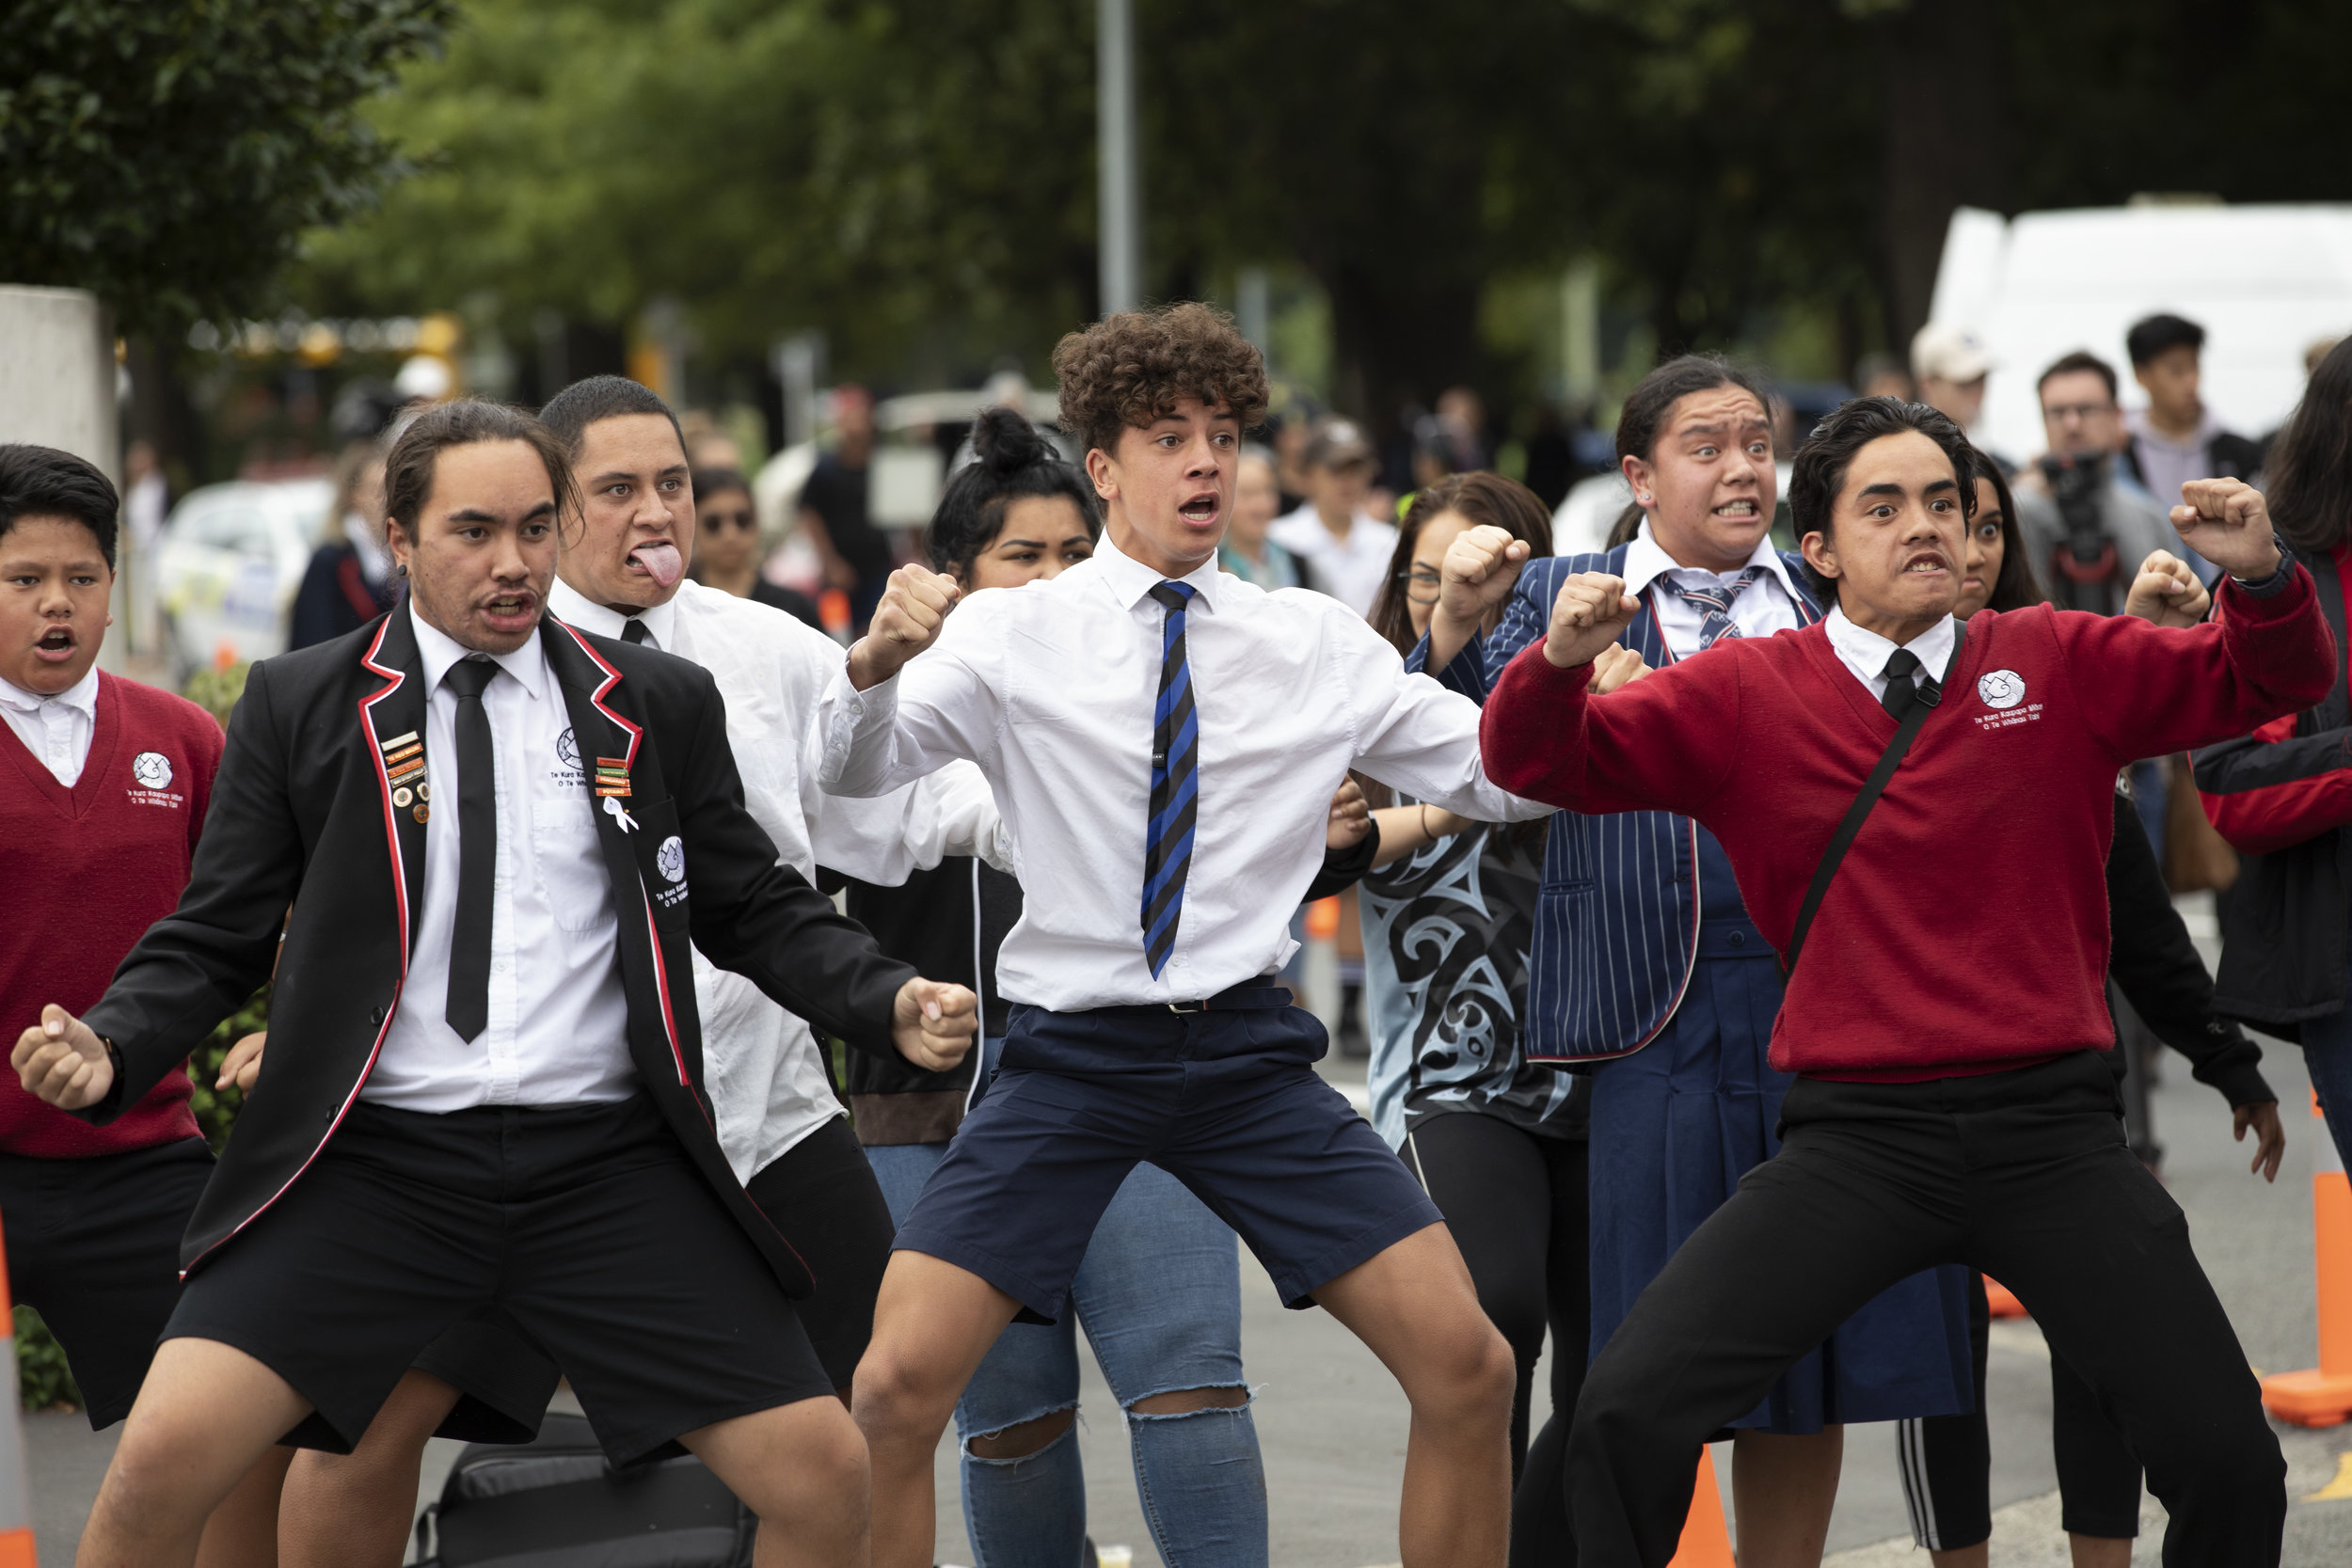  School pupils from Christchurch schools perform an impromptu Haka opposite the Al-Noor Mosque during a youth rally in support of the victims of the mosque murders in Christchurch, New Zealand.
Photo by Philip Coburn, 18 March 2019
 